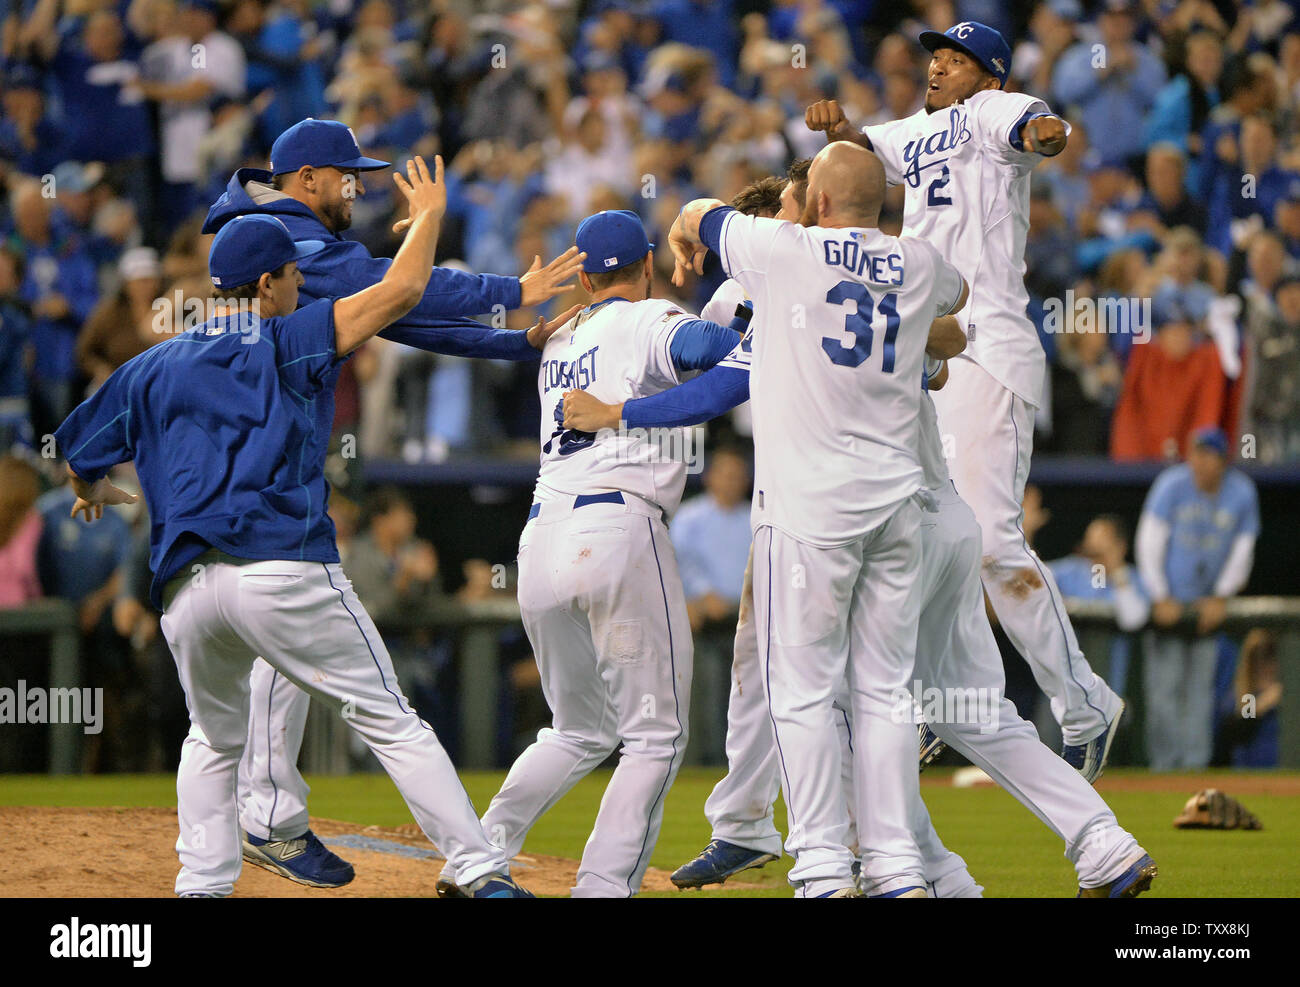 Kansas City Royals celebrate win over the Toronto Blue Jays in the ALCS  game 6 at Kaufman Stadium in Kansas City on October 23, 2015. Kansas City  beats Toronto 4-3 to win